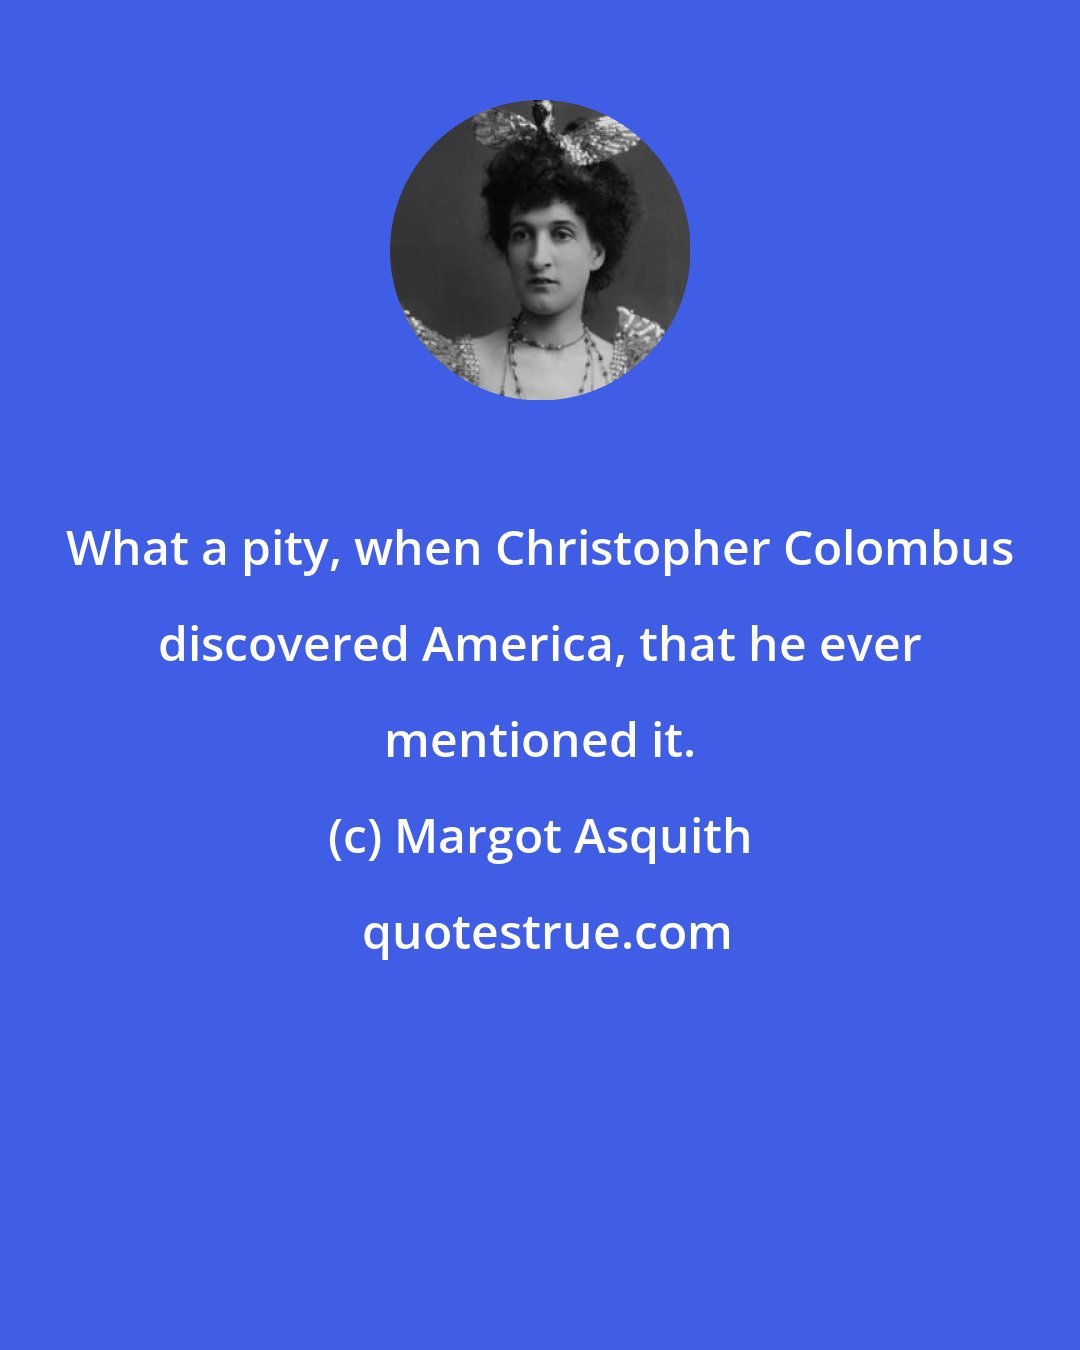 Margot Asquith: What a pity, when Christopher Colombus discovered America, that he ever mentioned it.